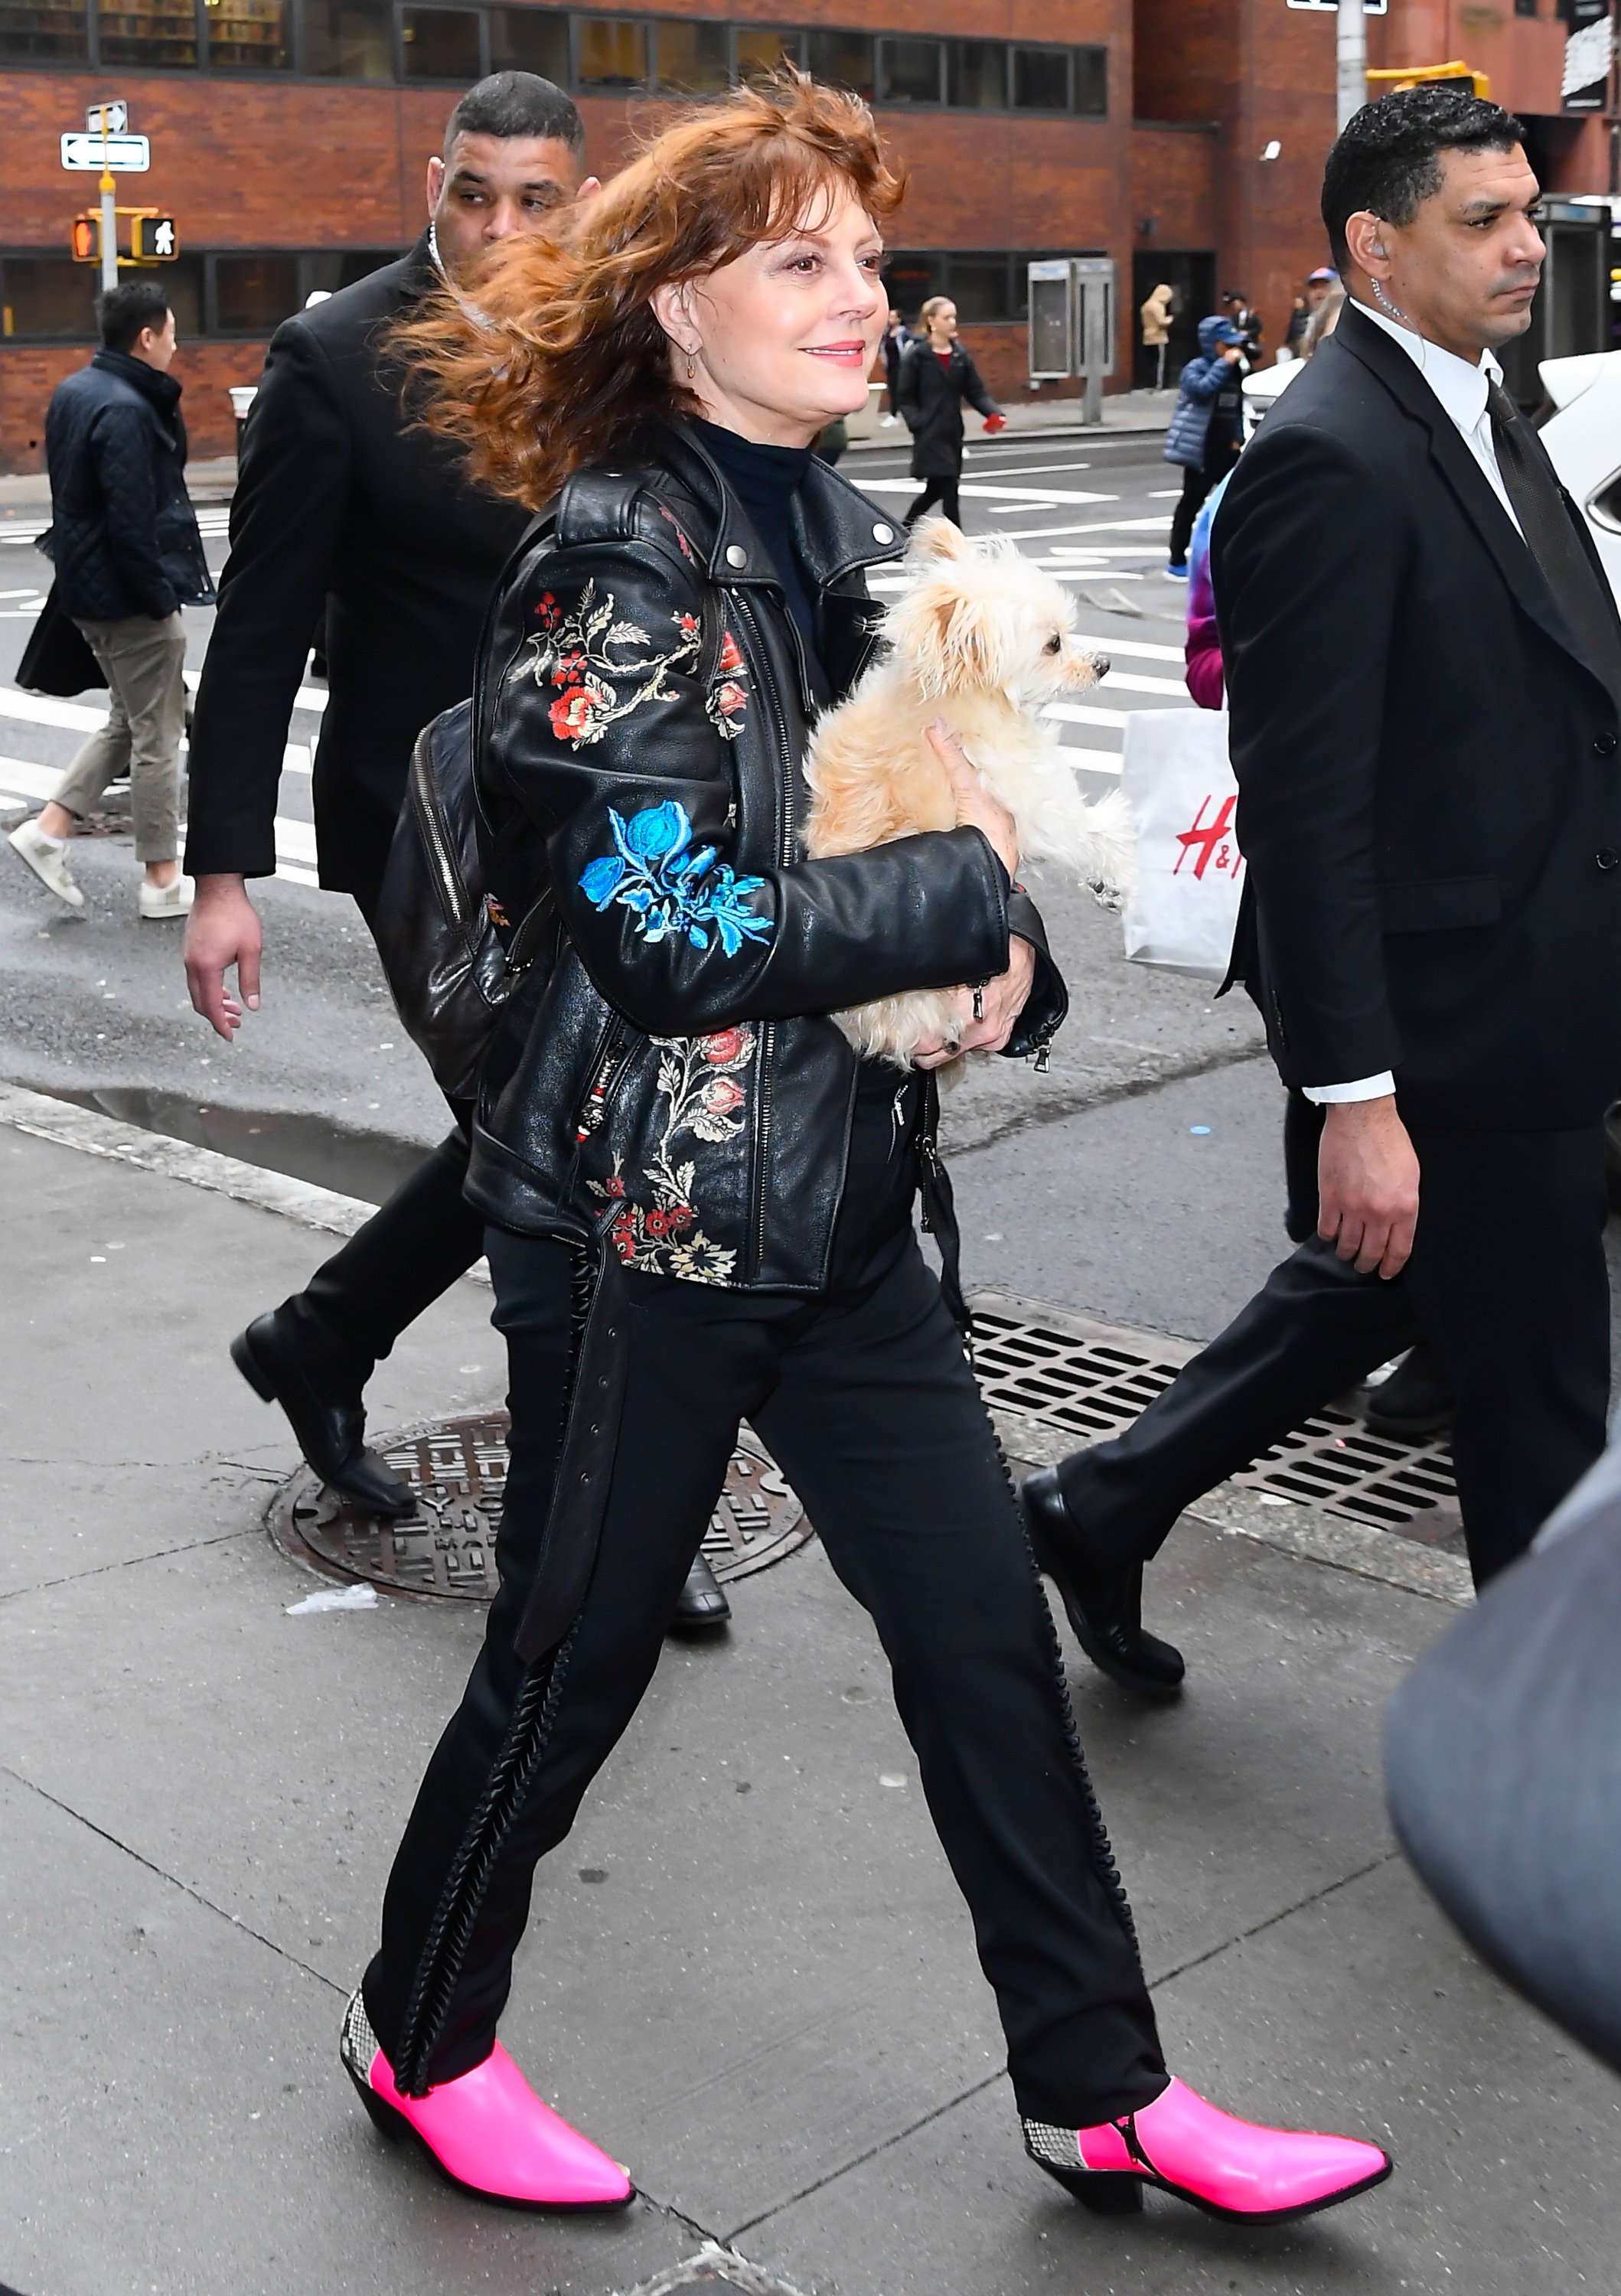 Susan Sarandon is seen outside Build Studio on February 26, 2020 in New York City. | Source: Getty Images